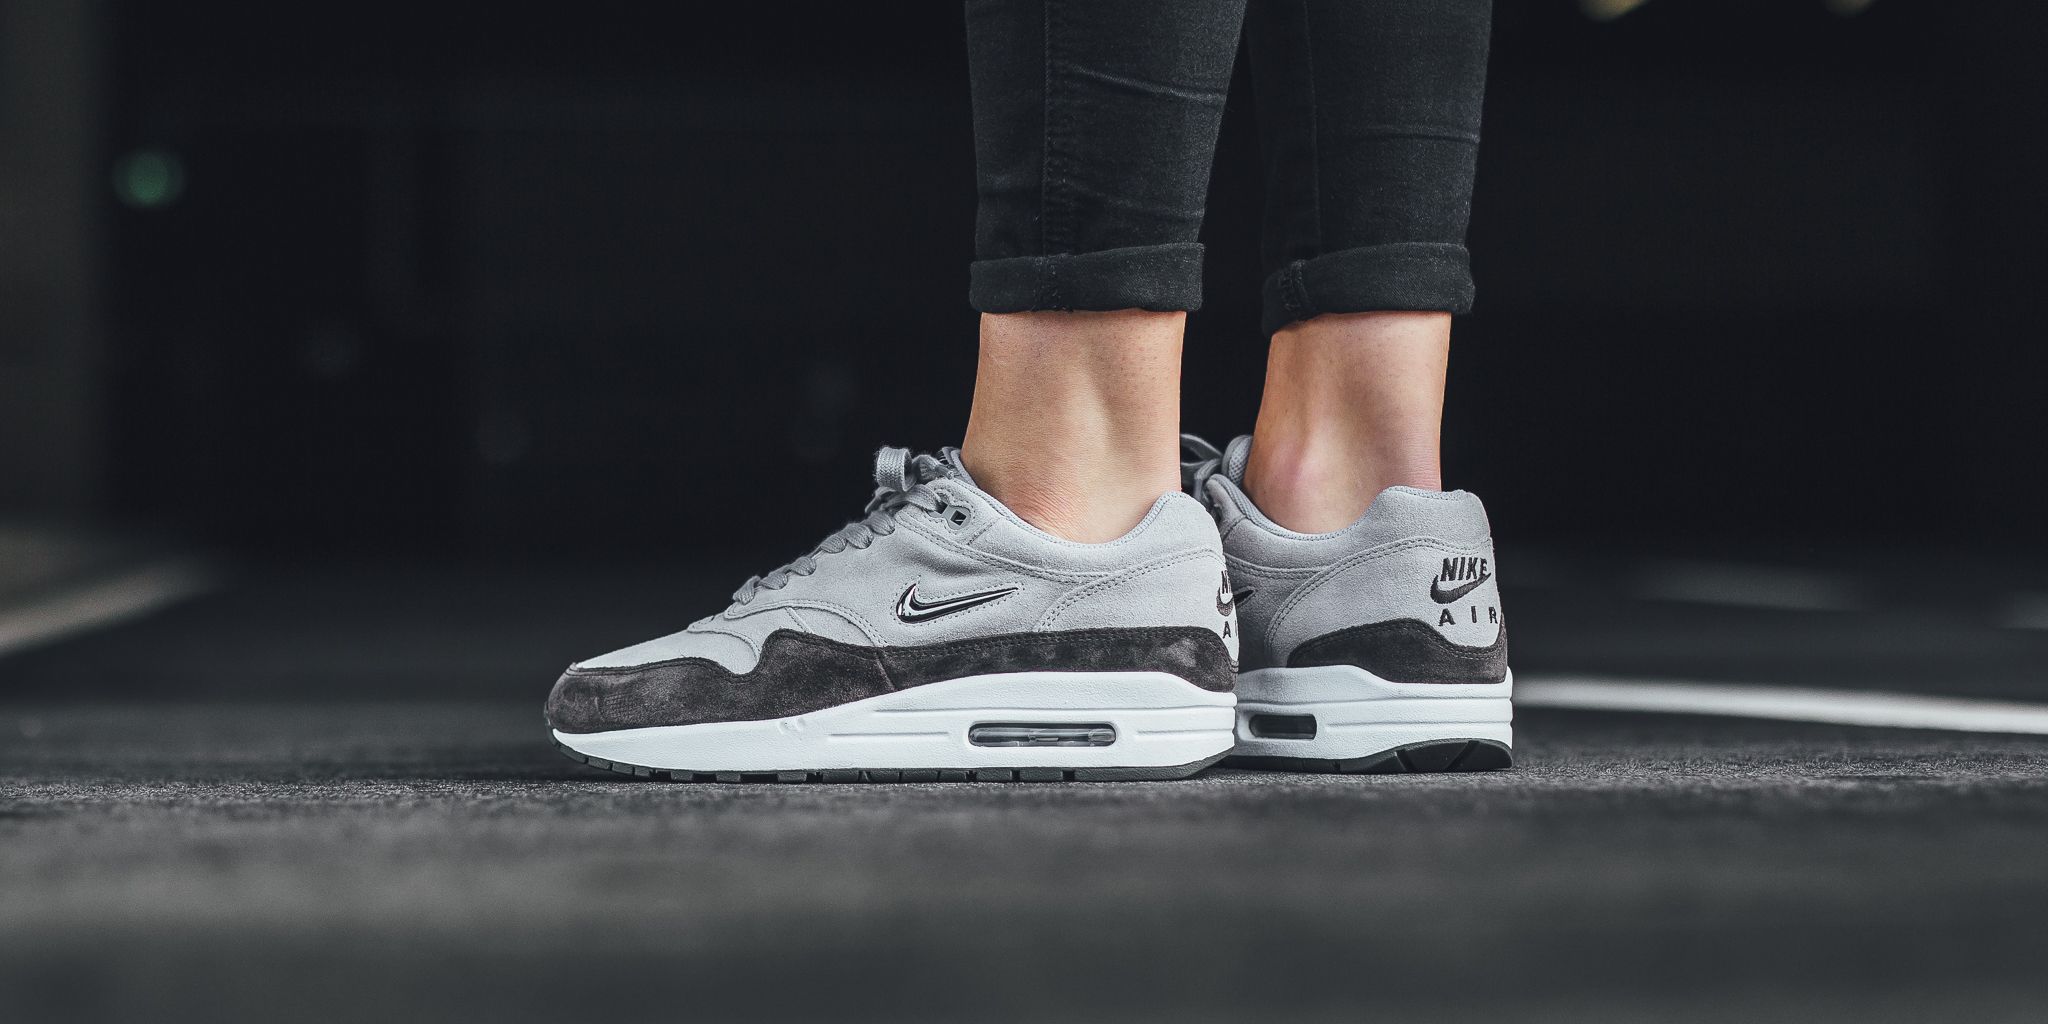 Aanbevolen majoor Rook Titolo on Twitter: "Our latest #Sale styles available HERE! 🦇🦇🦇 Nike  Wmns Air Max 1 Premium SC - JEWEL - Wolf Grey shop NOW:  https://t.co/qwLA8mt3T4 #nike #wmns #airmax #airmax1 #air #max #jewel #